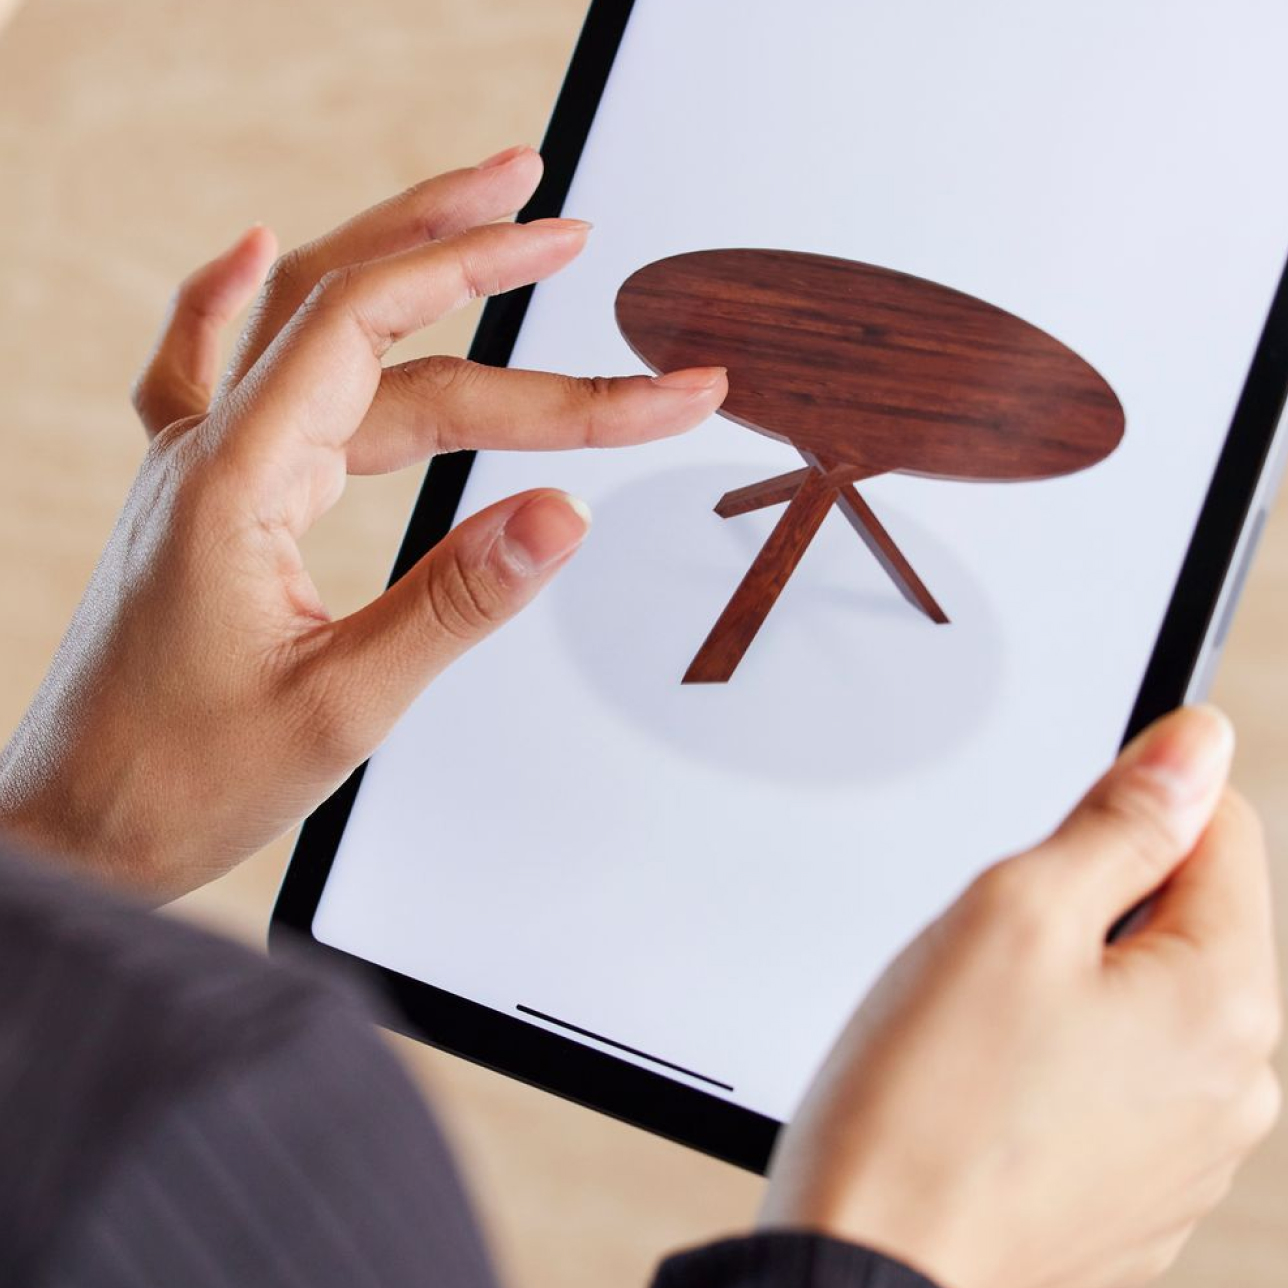 Home & Furniture: How Can a 3D Product Configurator Streamline Your Sales Process?